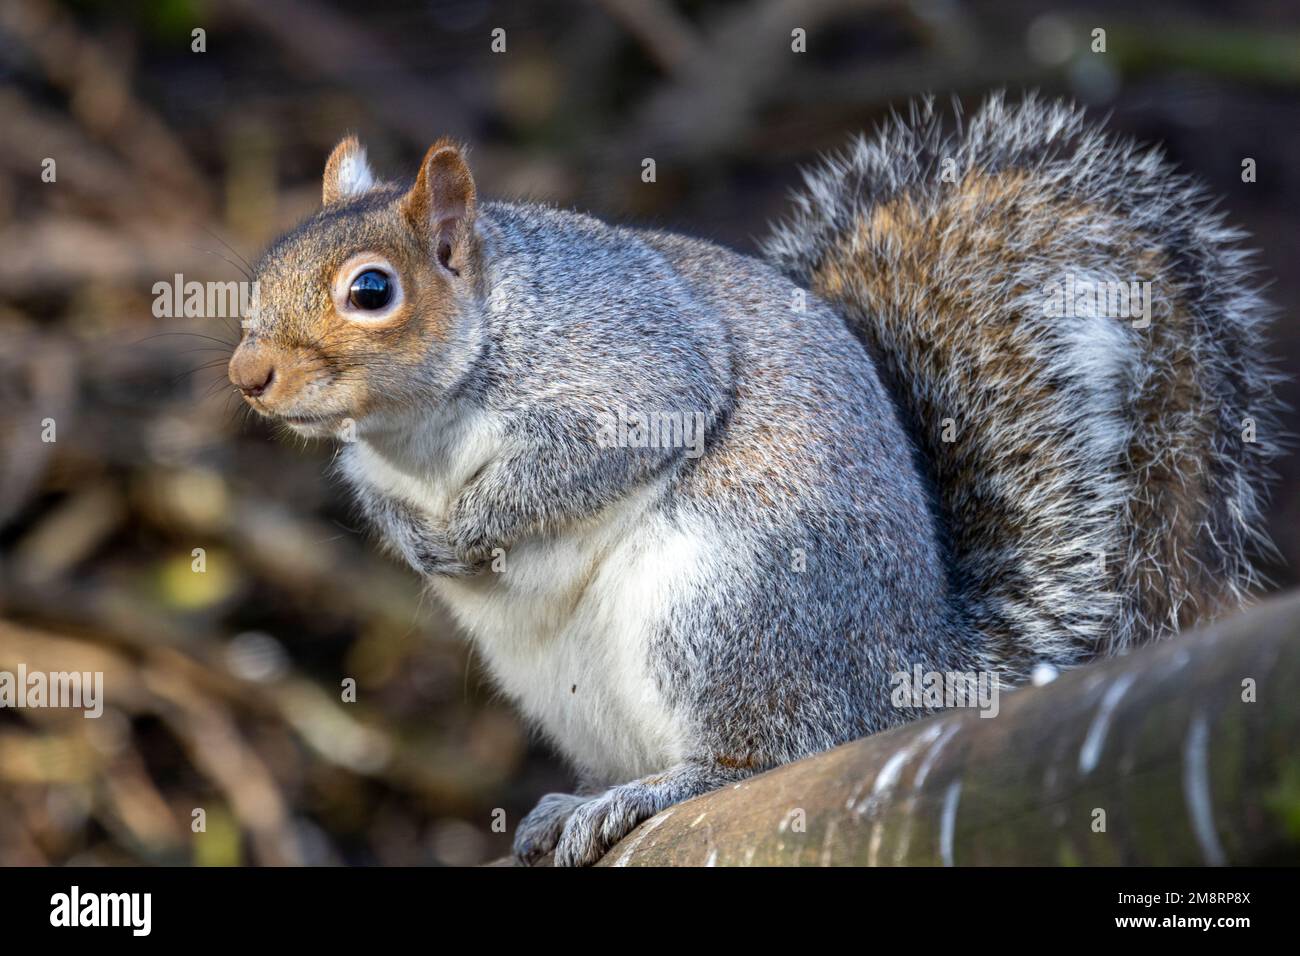 The introduced Grey squirrel is now a common sight in parks and gardens in the UK. They are intelligent creatures that have endeared themselves to us. Stock Photo